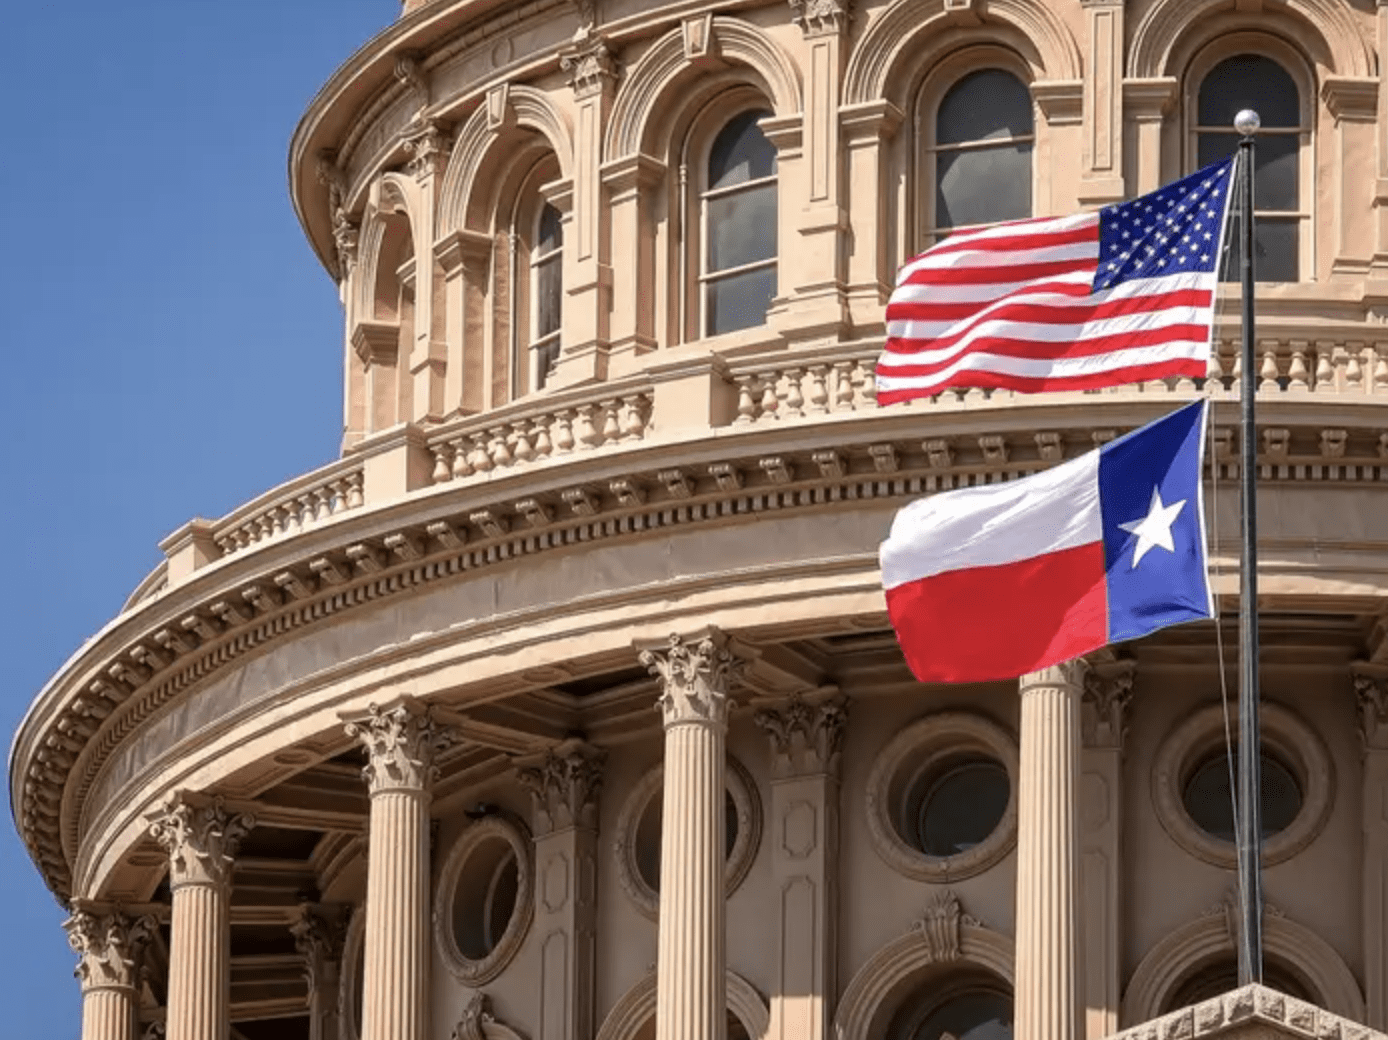 The Texas GOP floated the idea of seceding from the U.S.